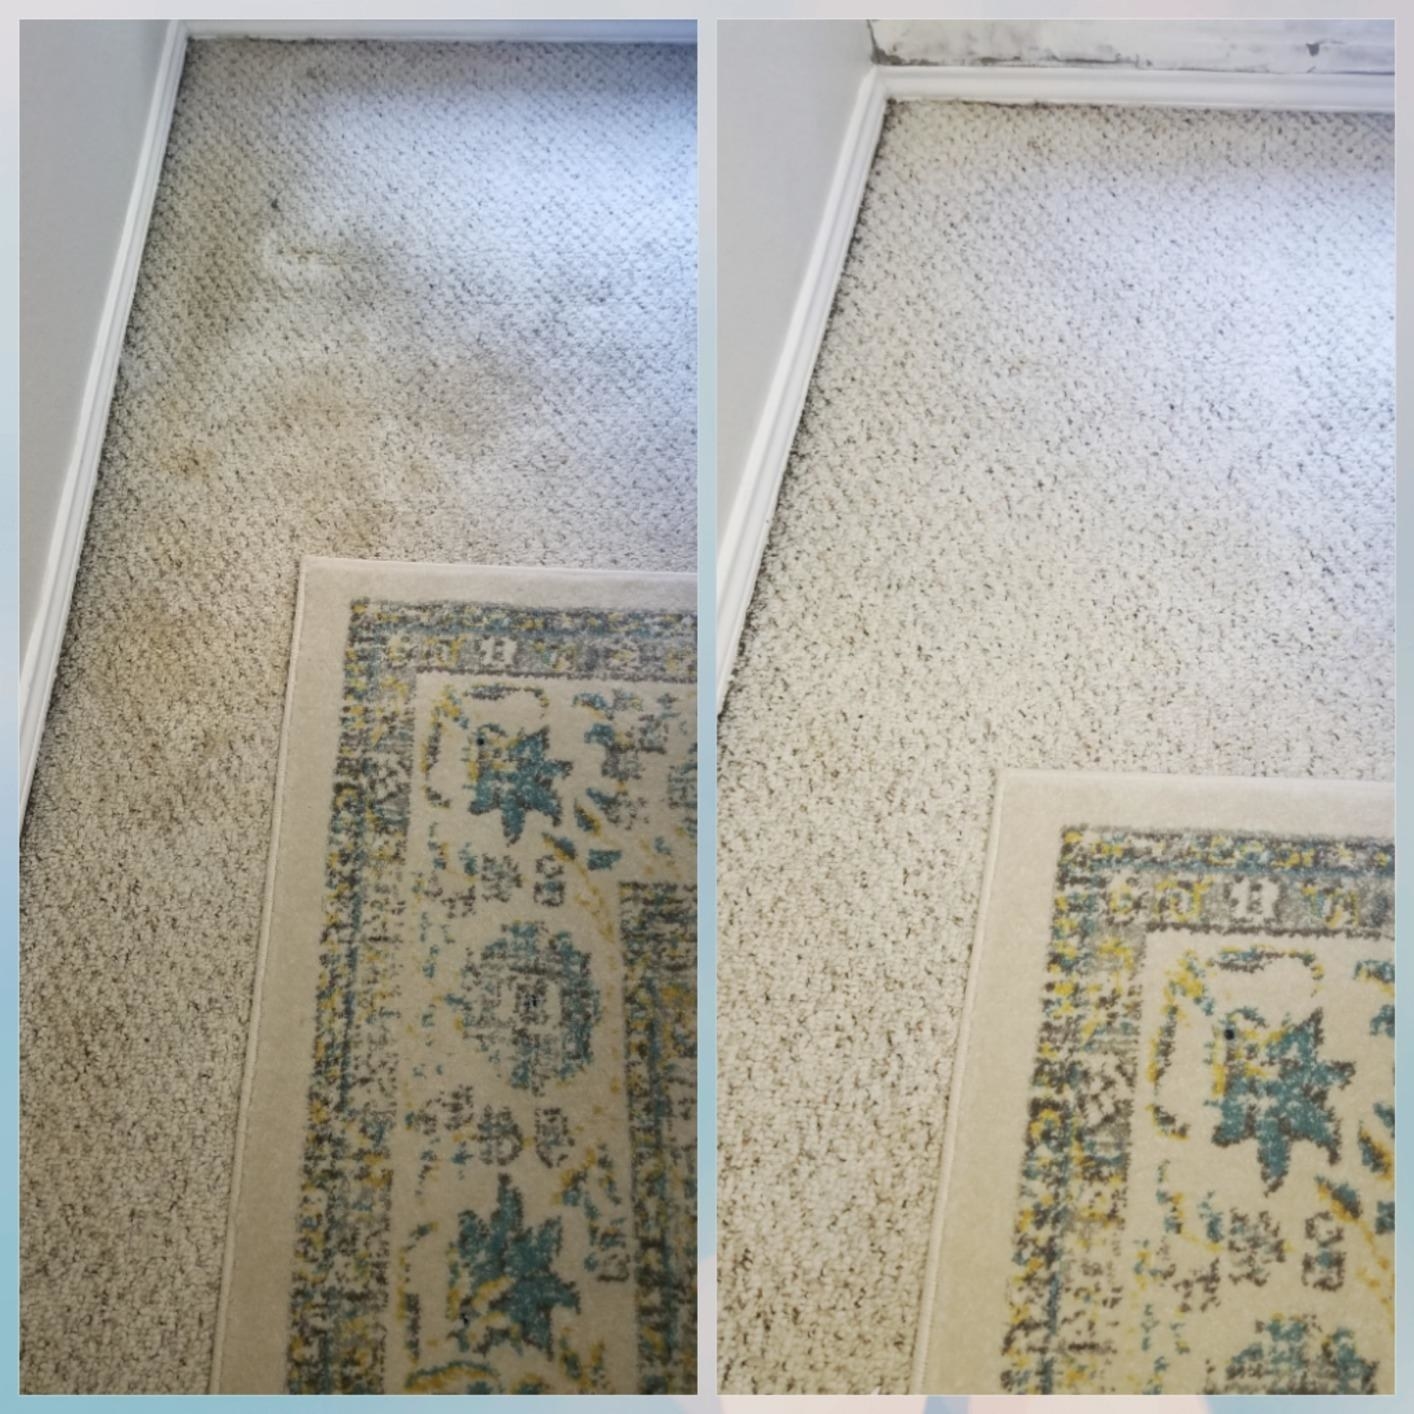 on left: reviewer pic of stained beige carpet. on right: same pic of carpet with less gray stains after using the instant carpet stain remover